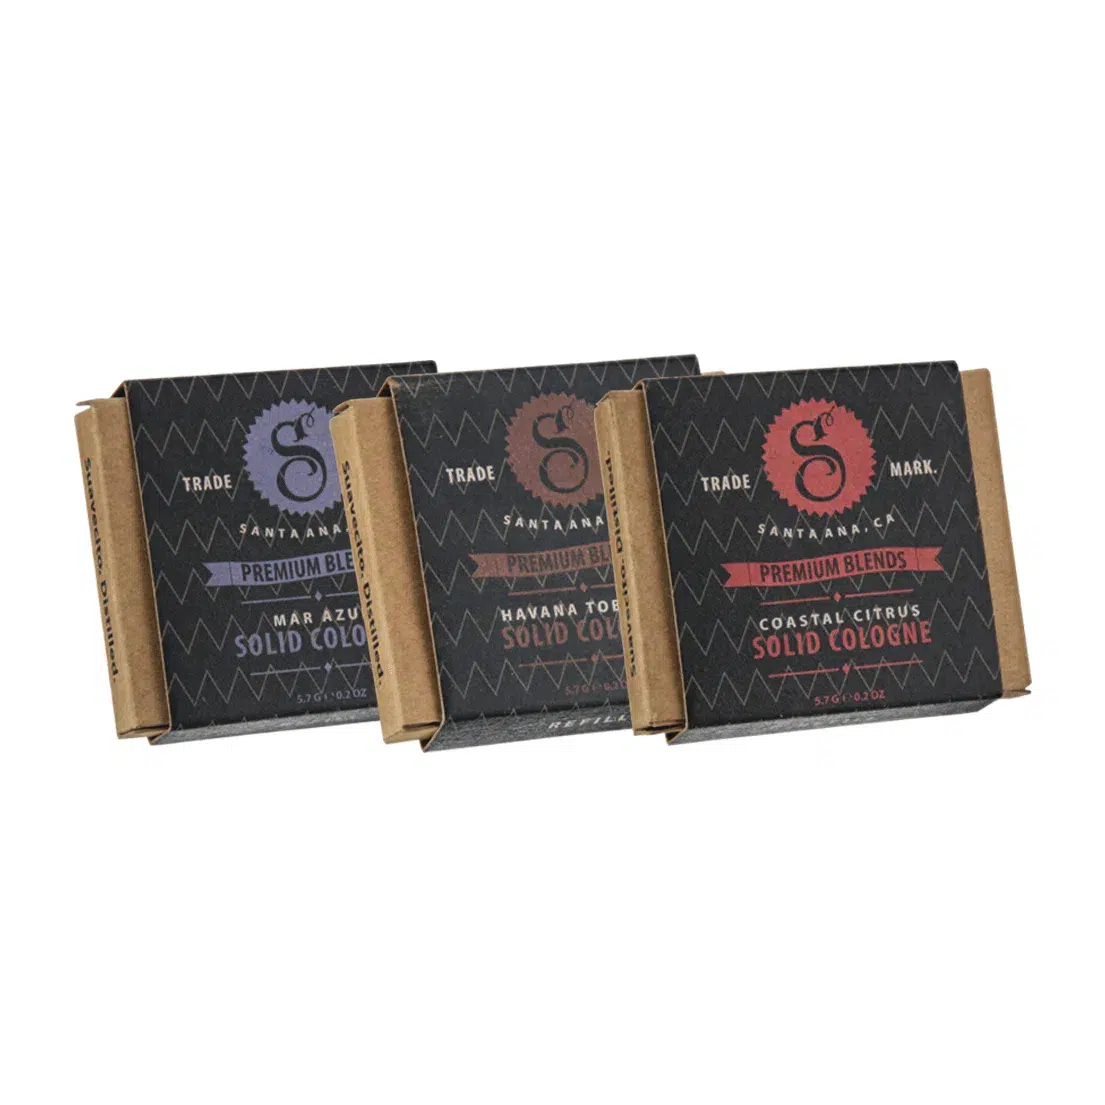 Premium Blends Solid Cologne Refill